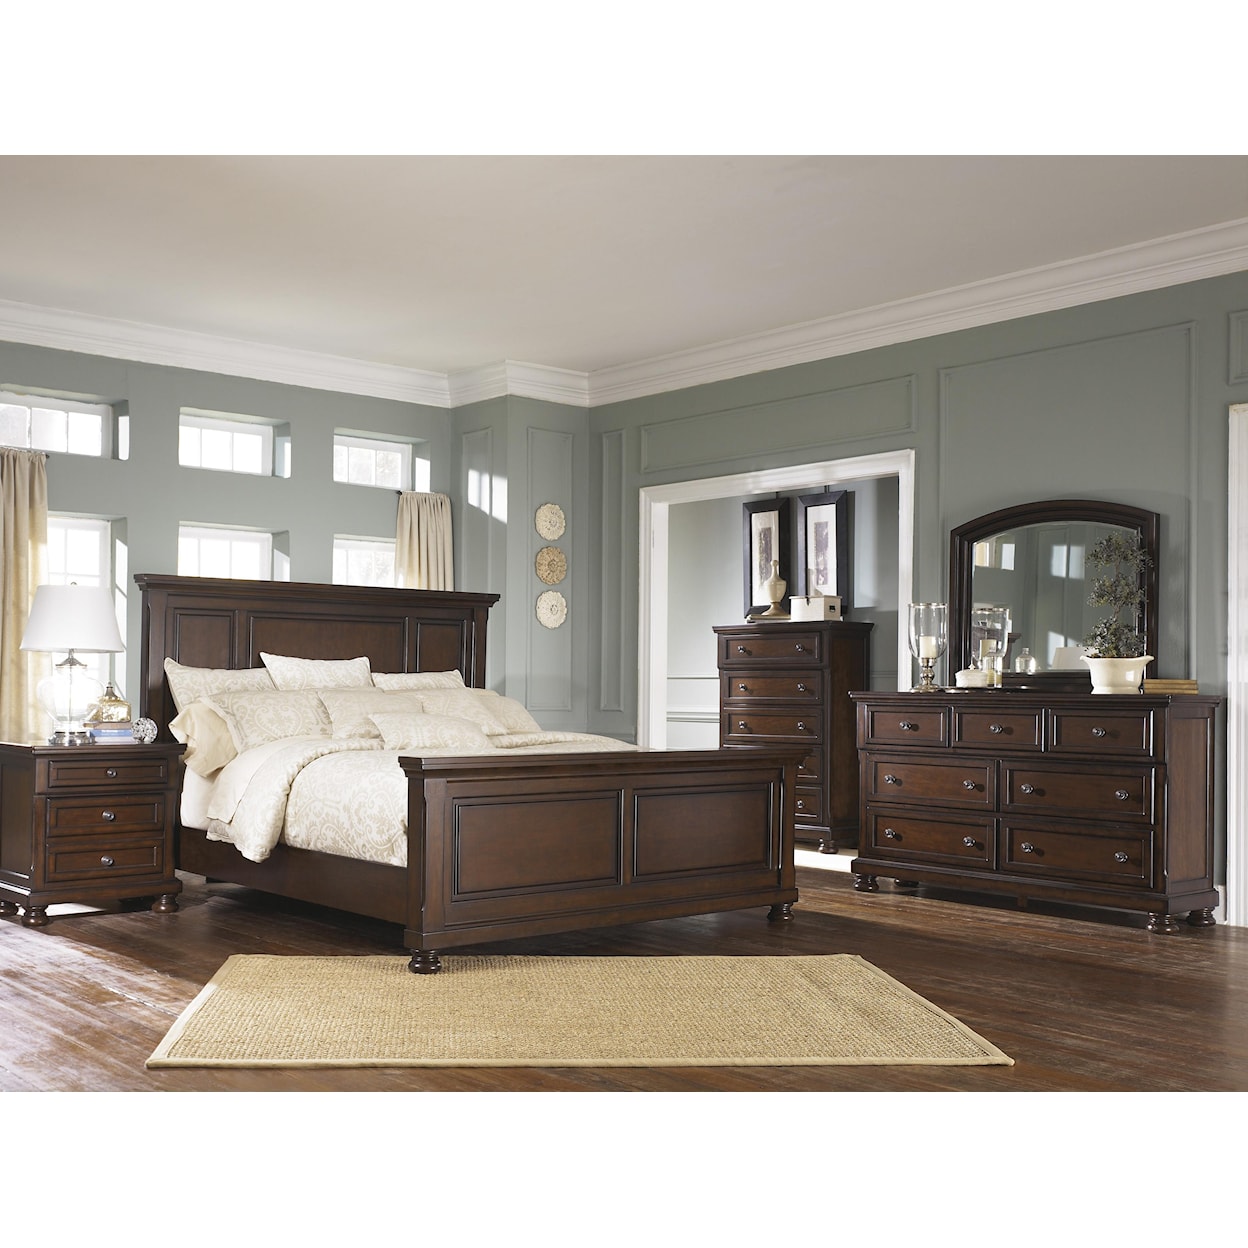 Signature Design by Ashley Furniture Porter Queen Bedroom Group